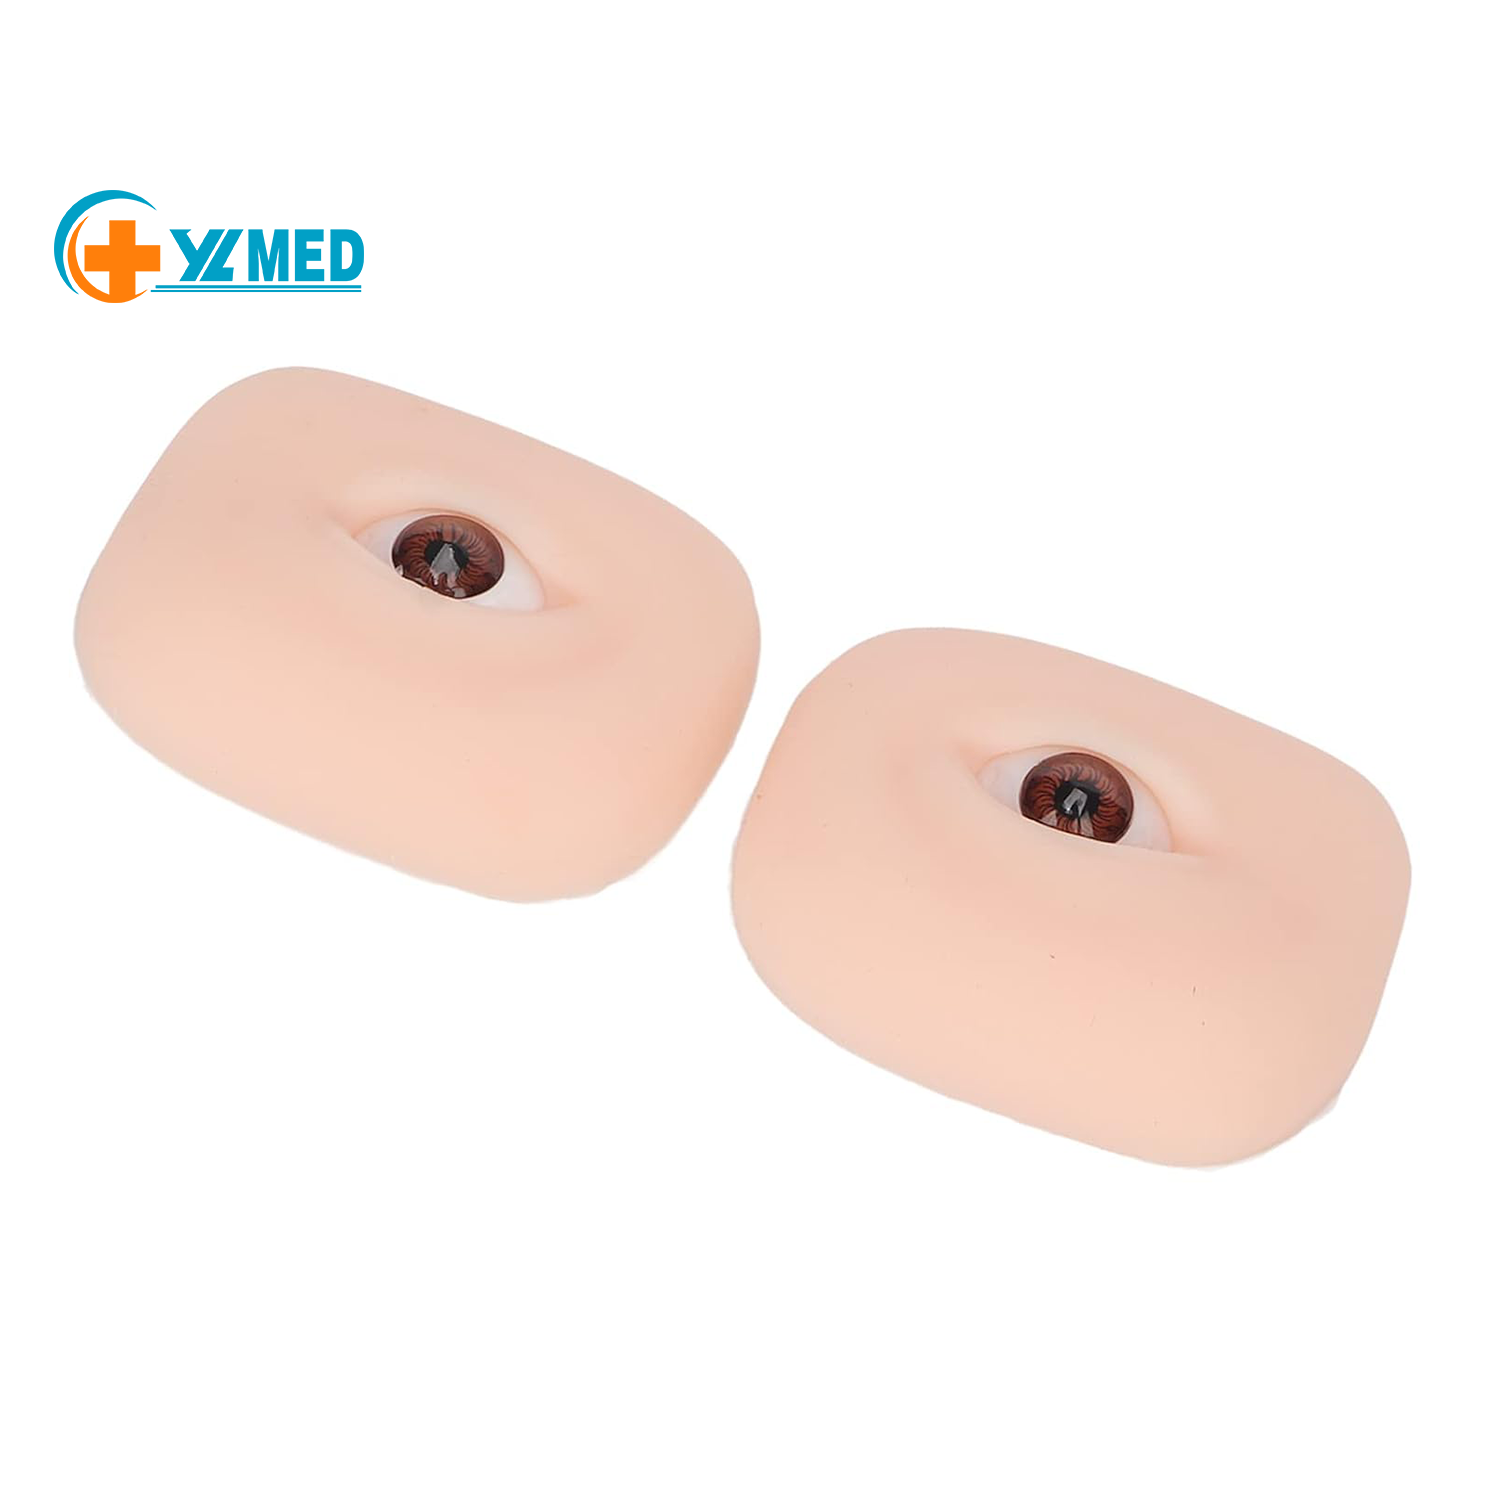 Soft Silicone Eye Model Flexible 5D for Practicing Piercing Suture Makeup Teaching Instructions for Eye Makeup